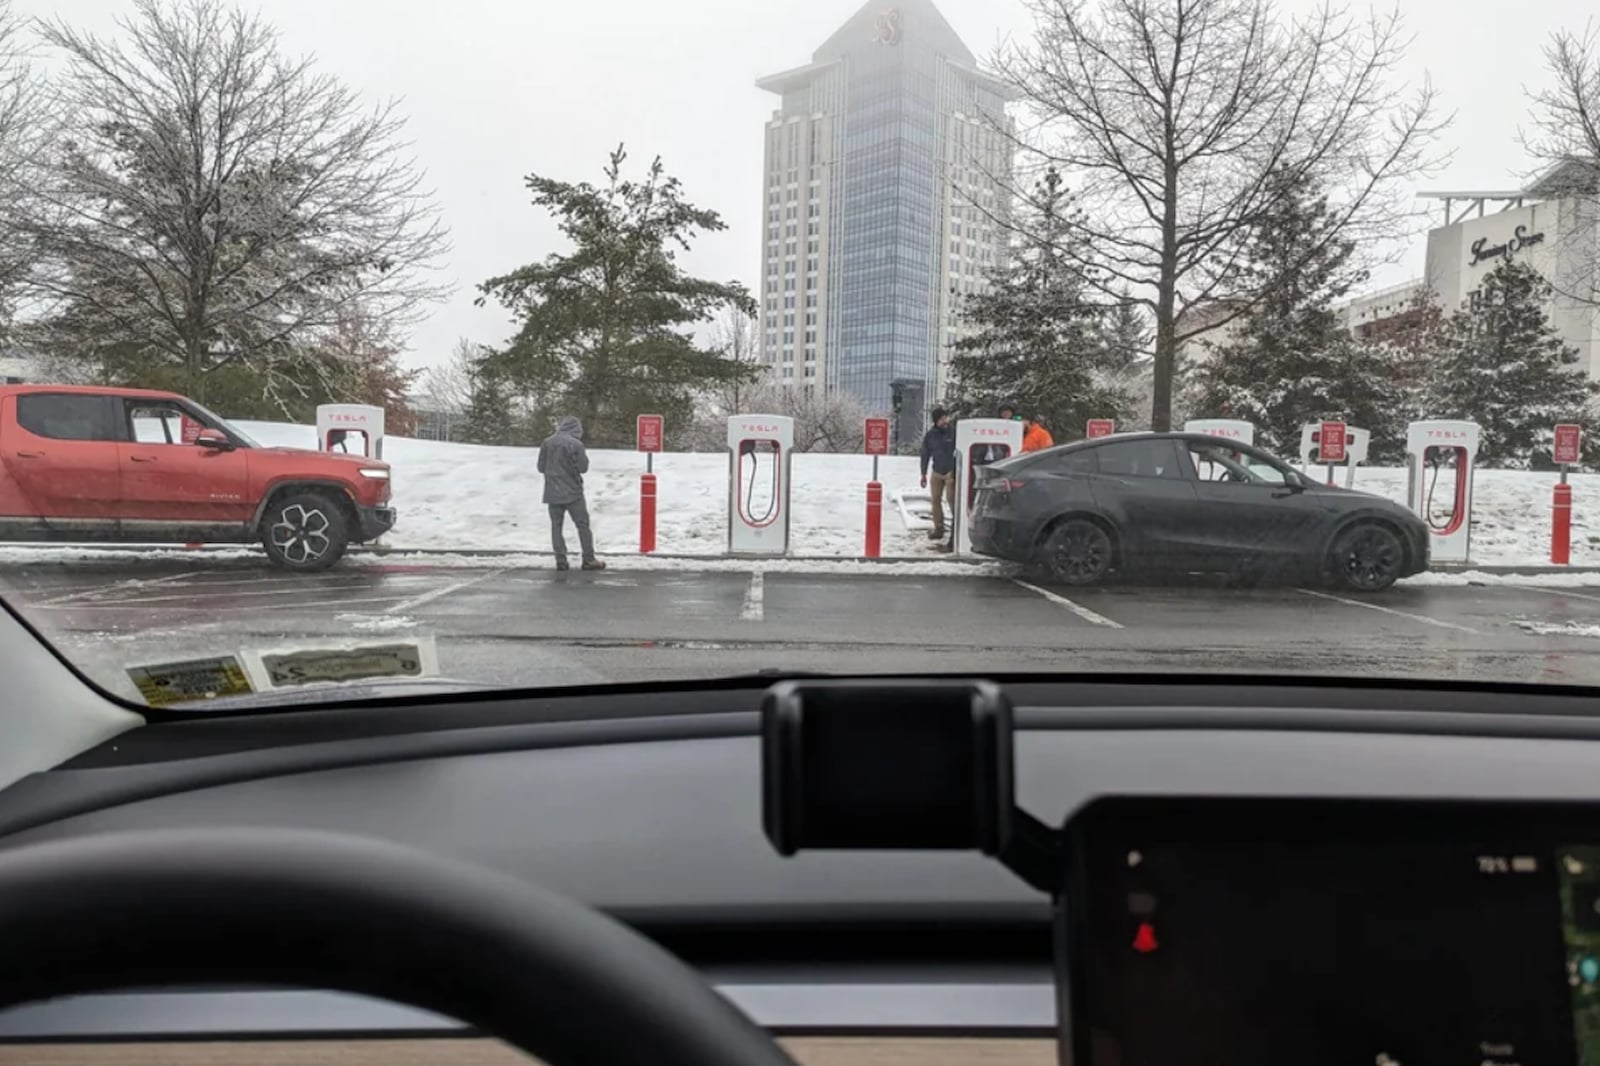 Tesla Superchargers With Magic Dock Spotted Charging A Rivian R1T